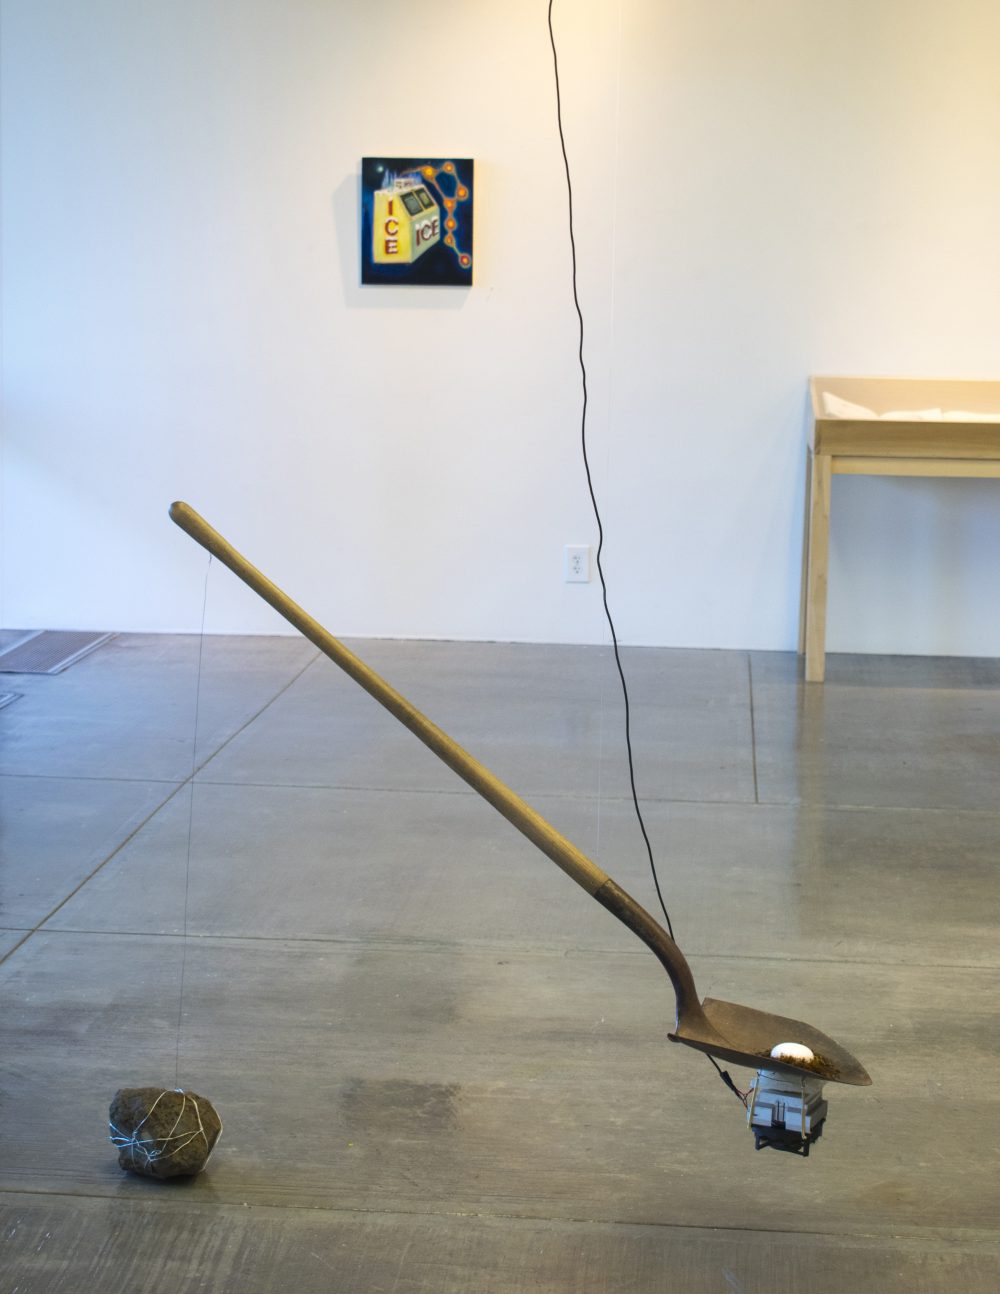 A shovel is suspended from the ceiling with a thermoelectric cooler attached to the underside of the blade and a ball of ice on the top side of the blade. A wire goes from the cooler to the ceiling, a large stone sits on the floor behind the shovel, a painting and a table are at the wall in the background.